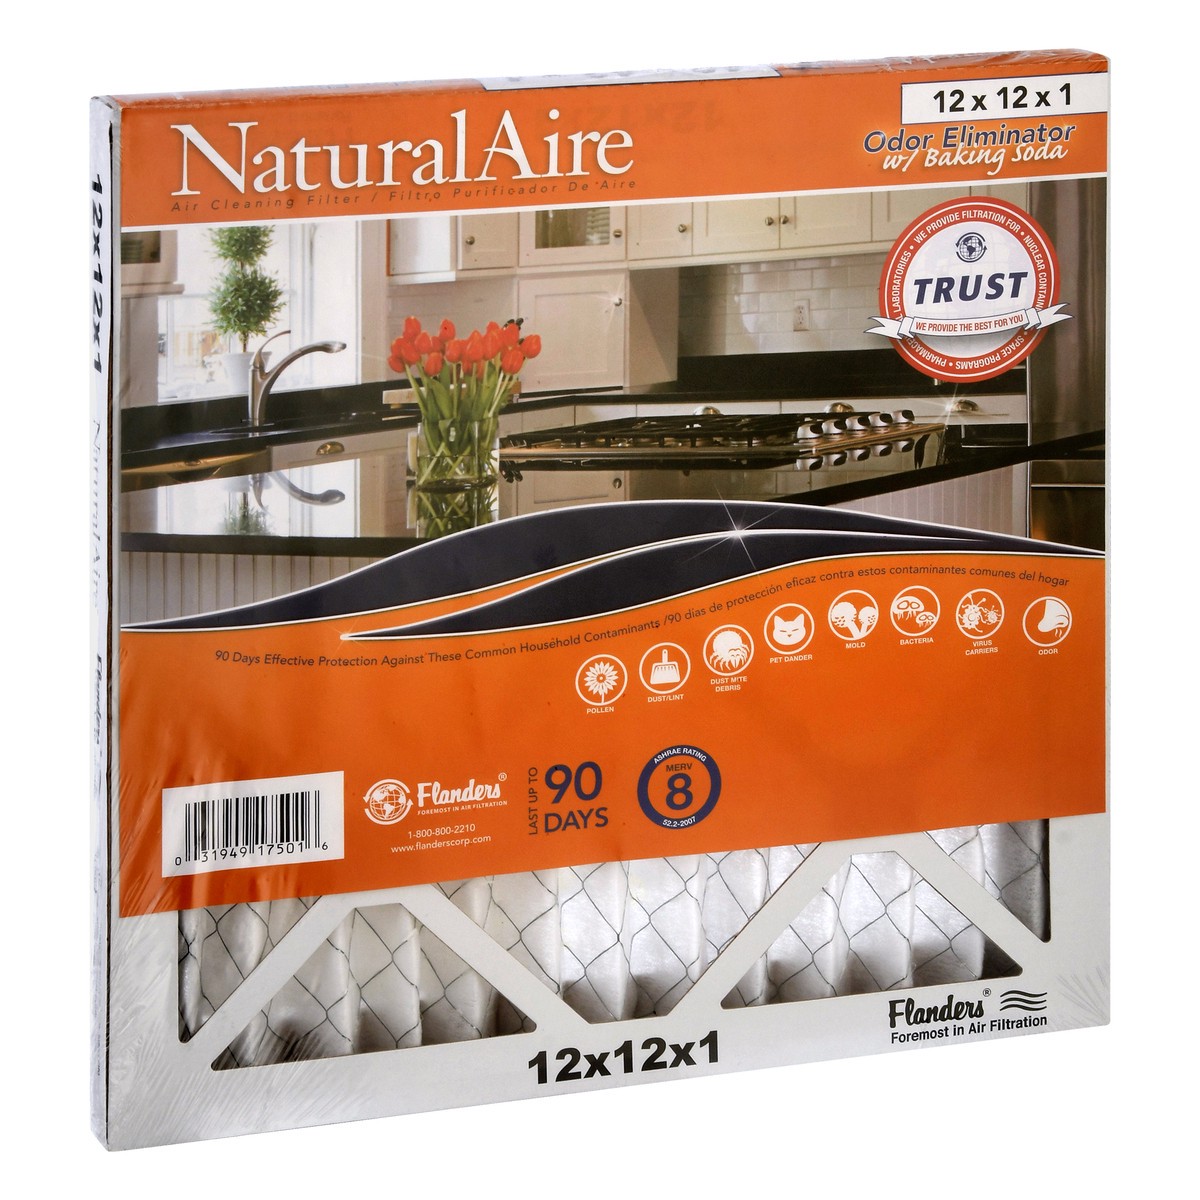 slide 2 of 11, NaturalAire 12" x 12" x 1" Air Cleaning Filter Odor Eliminator With Baking Soda, LG